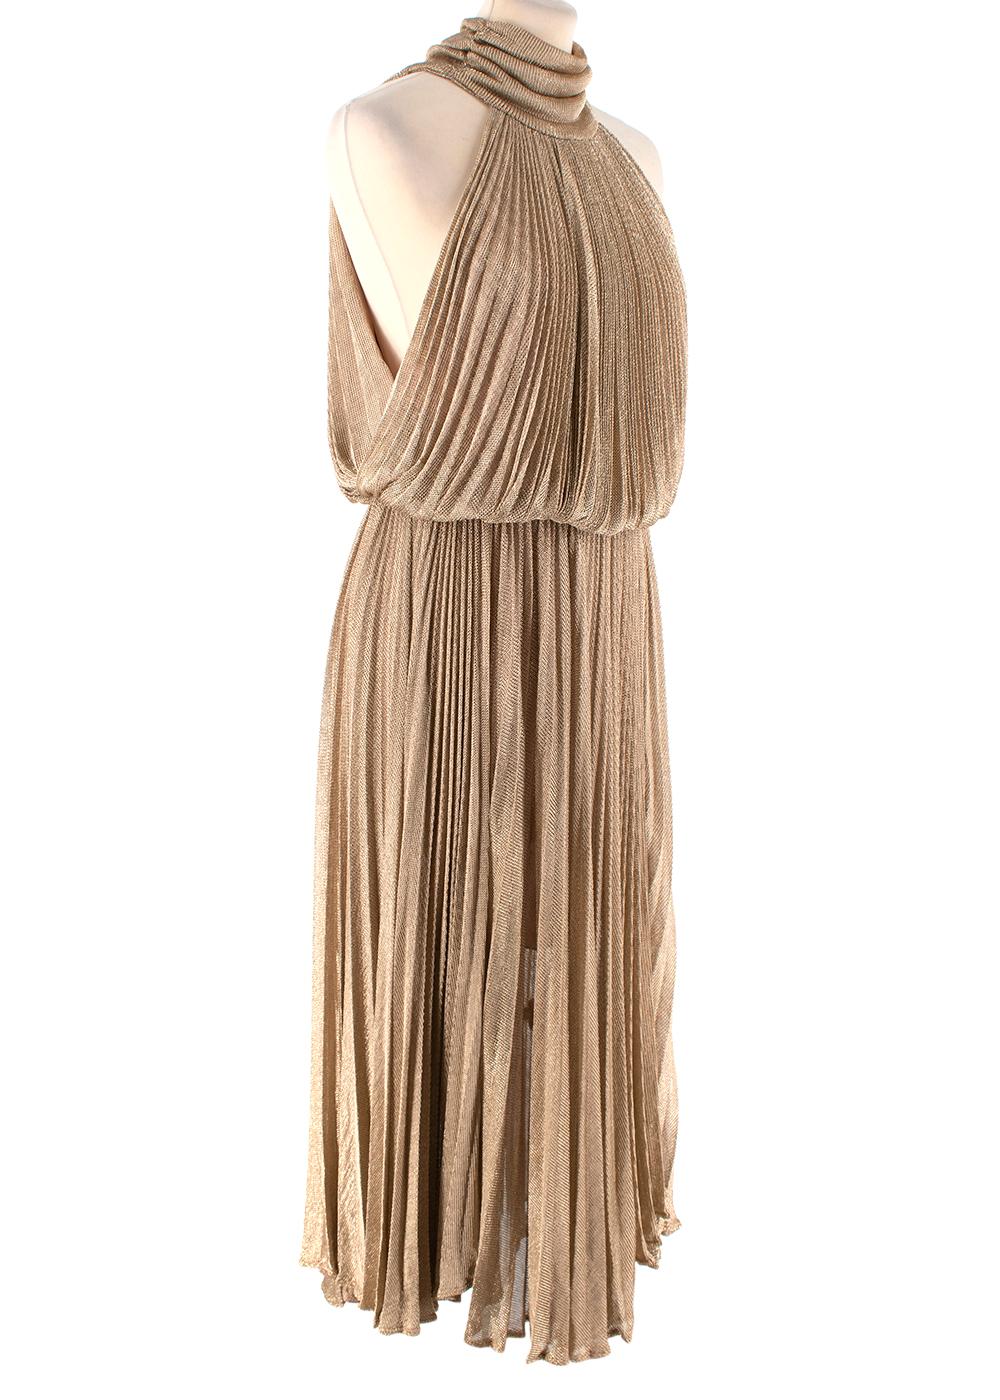 Maria Lucia Hohan Gold Metallic Pleated Dress

- Sleeveless
- High-neck
- Open back
- Button closure at the nape and concealed zip closure at the back 
- Elasticated waistband
- Fully lined

Materials:
59% Viscose
40% Lurex
1% Spandex

Dry clean